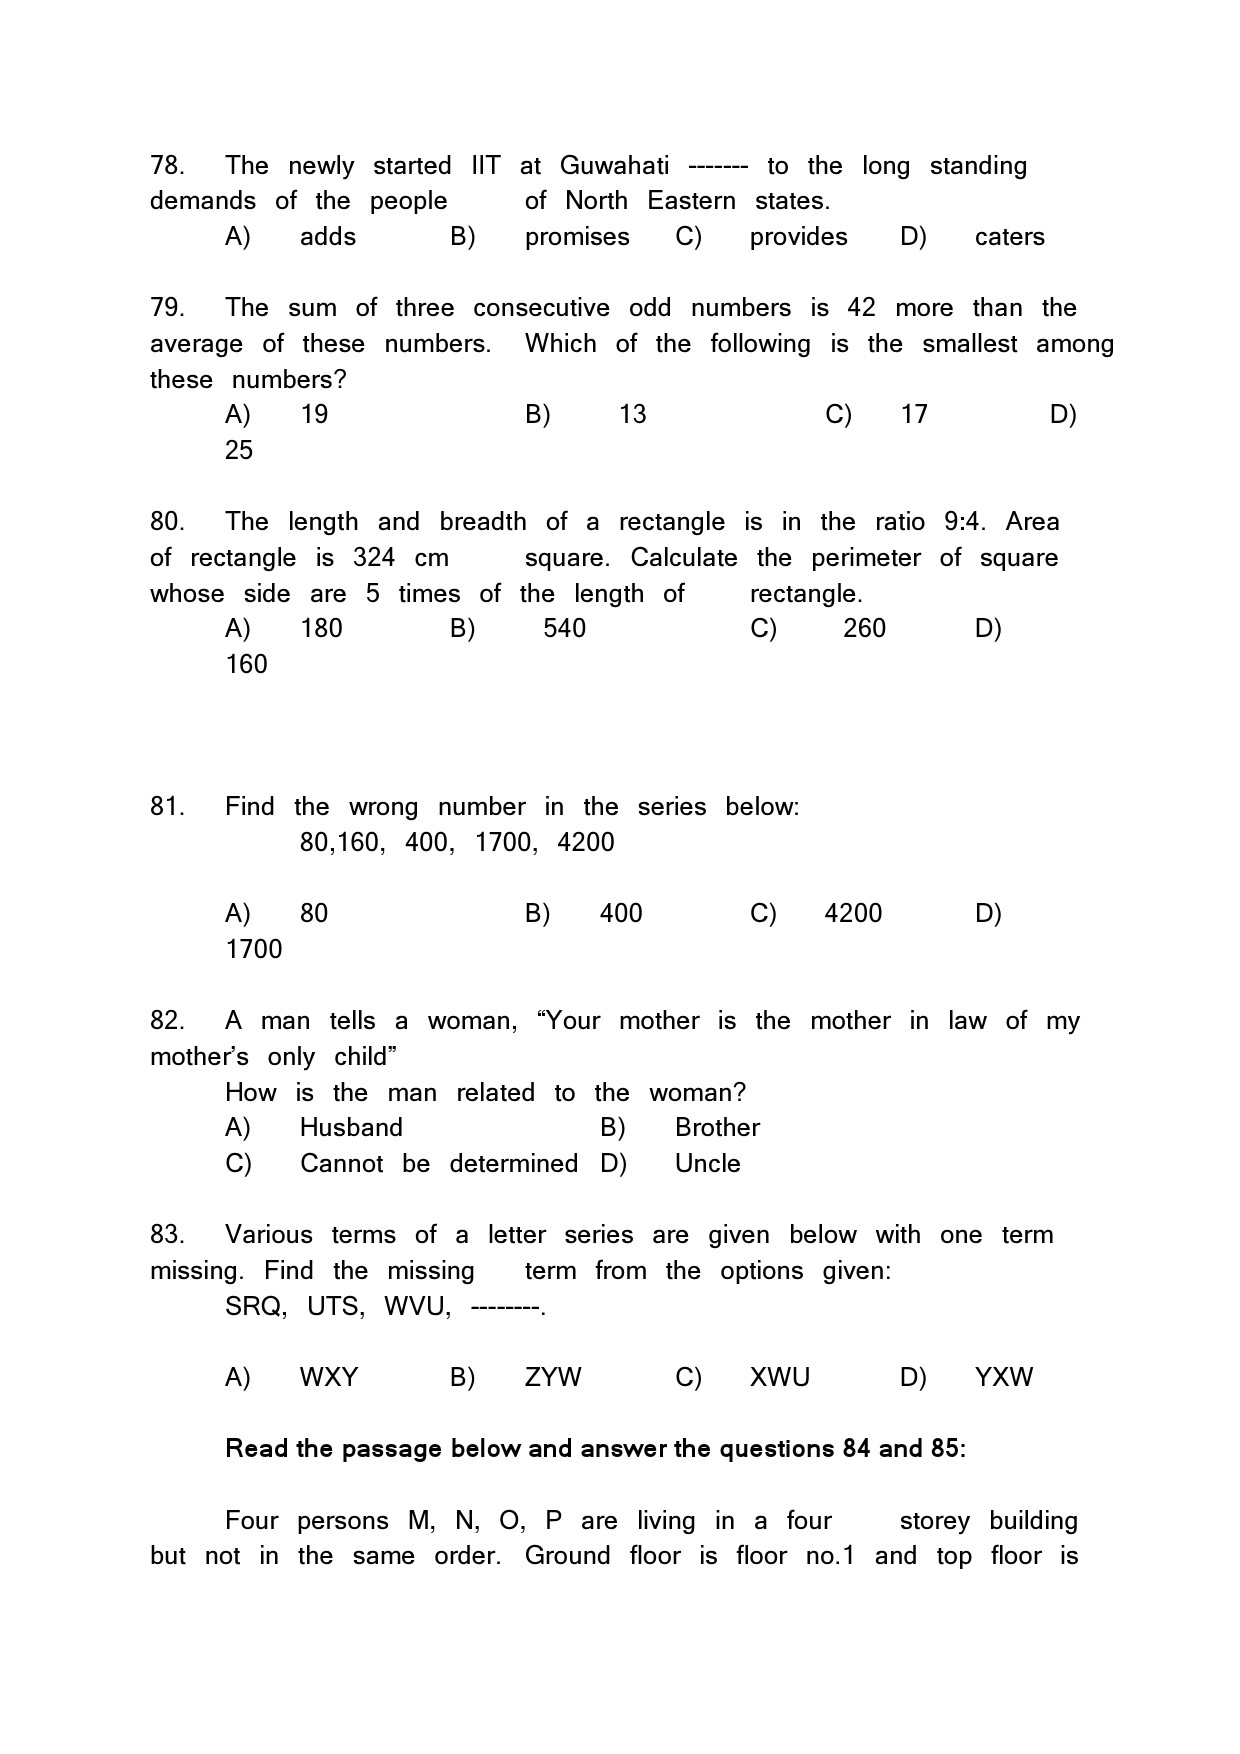 Kerala SET General Knowledge Exam Question Paper February 2020 12